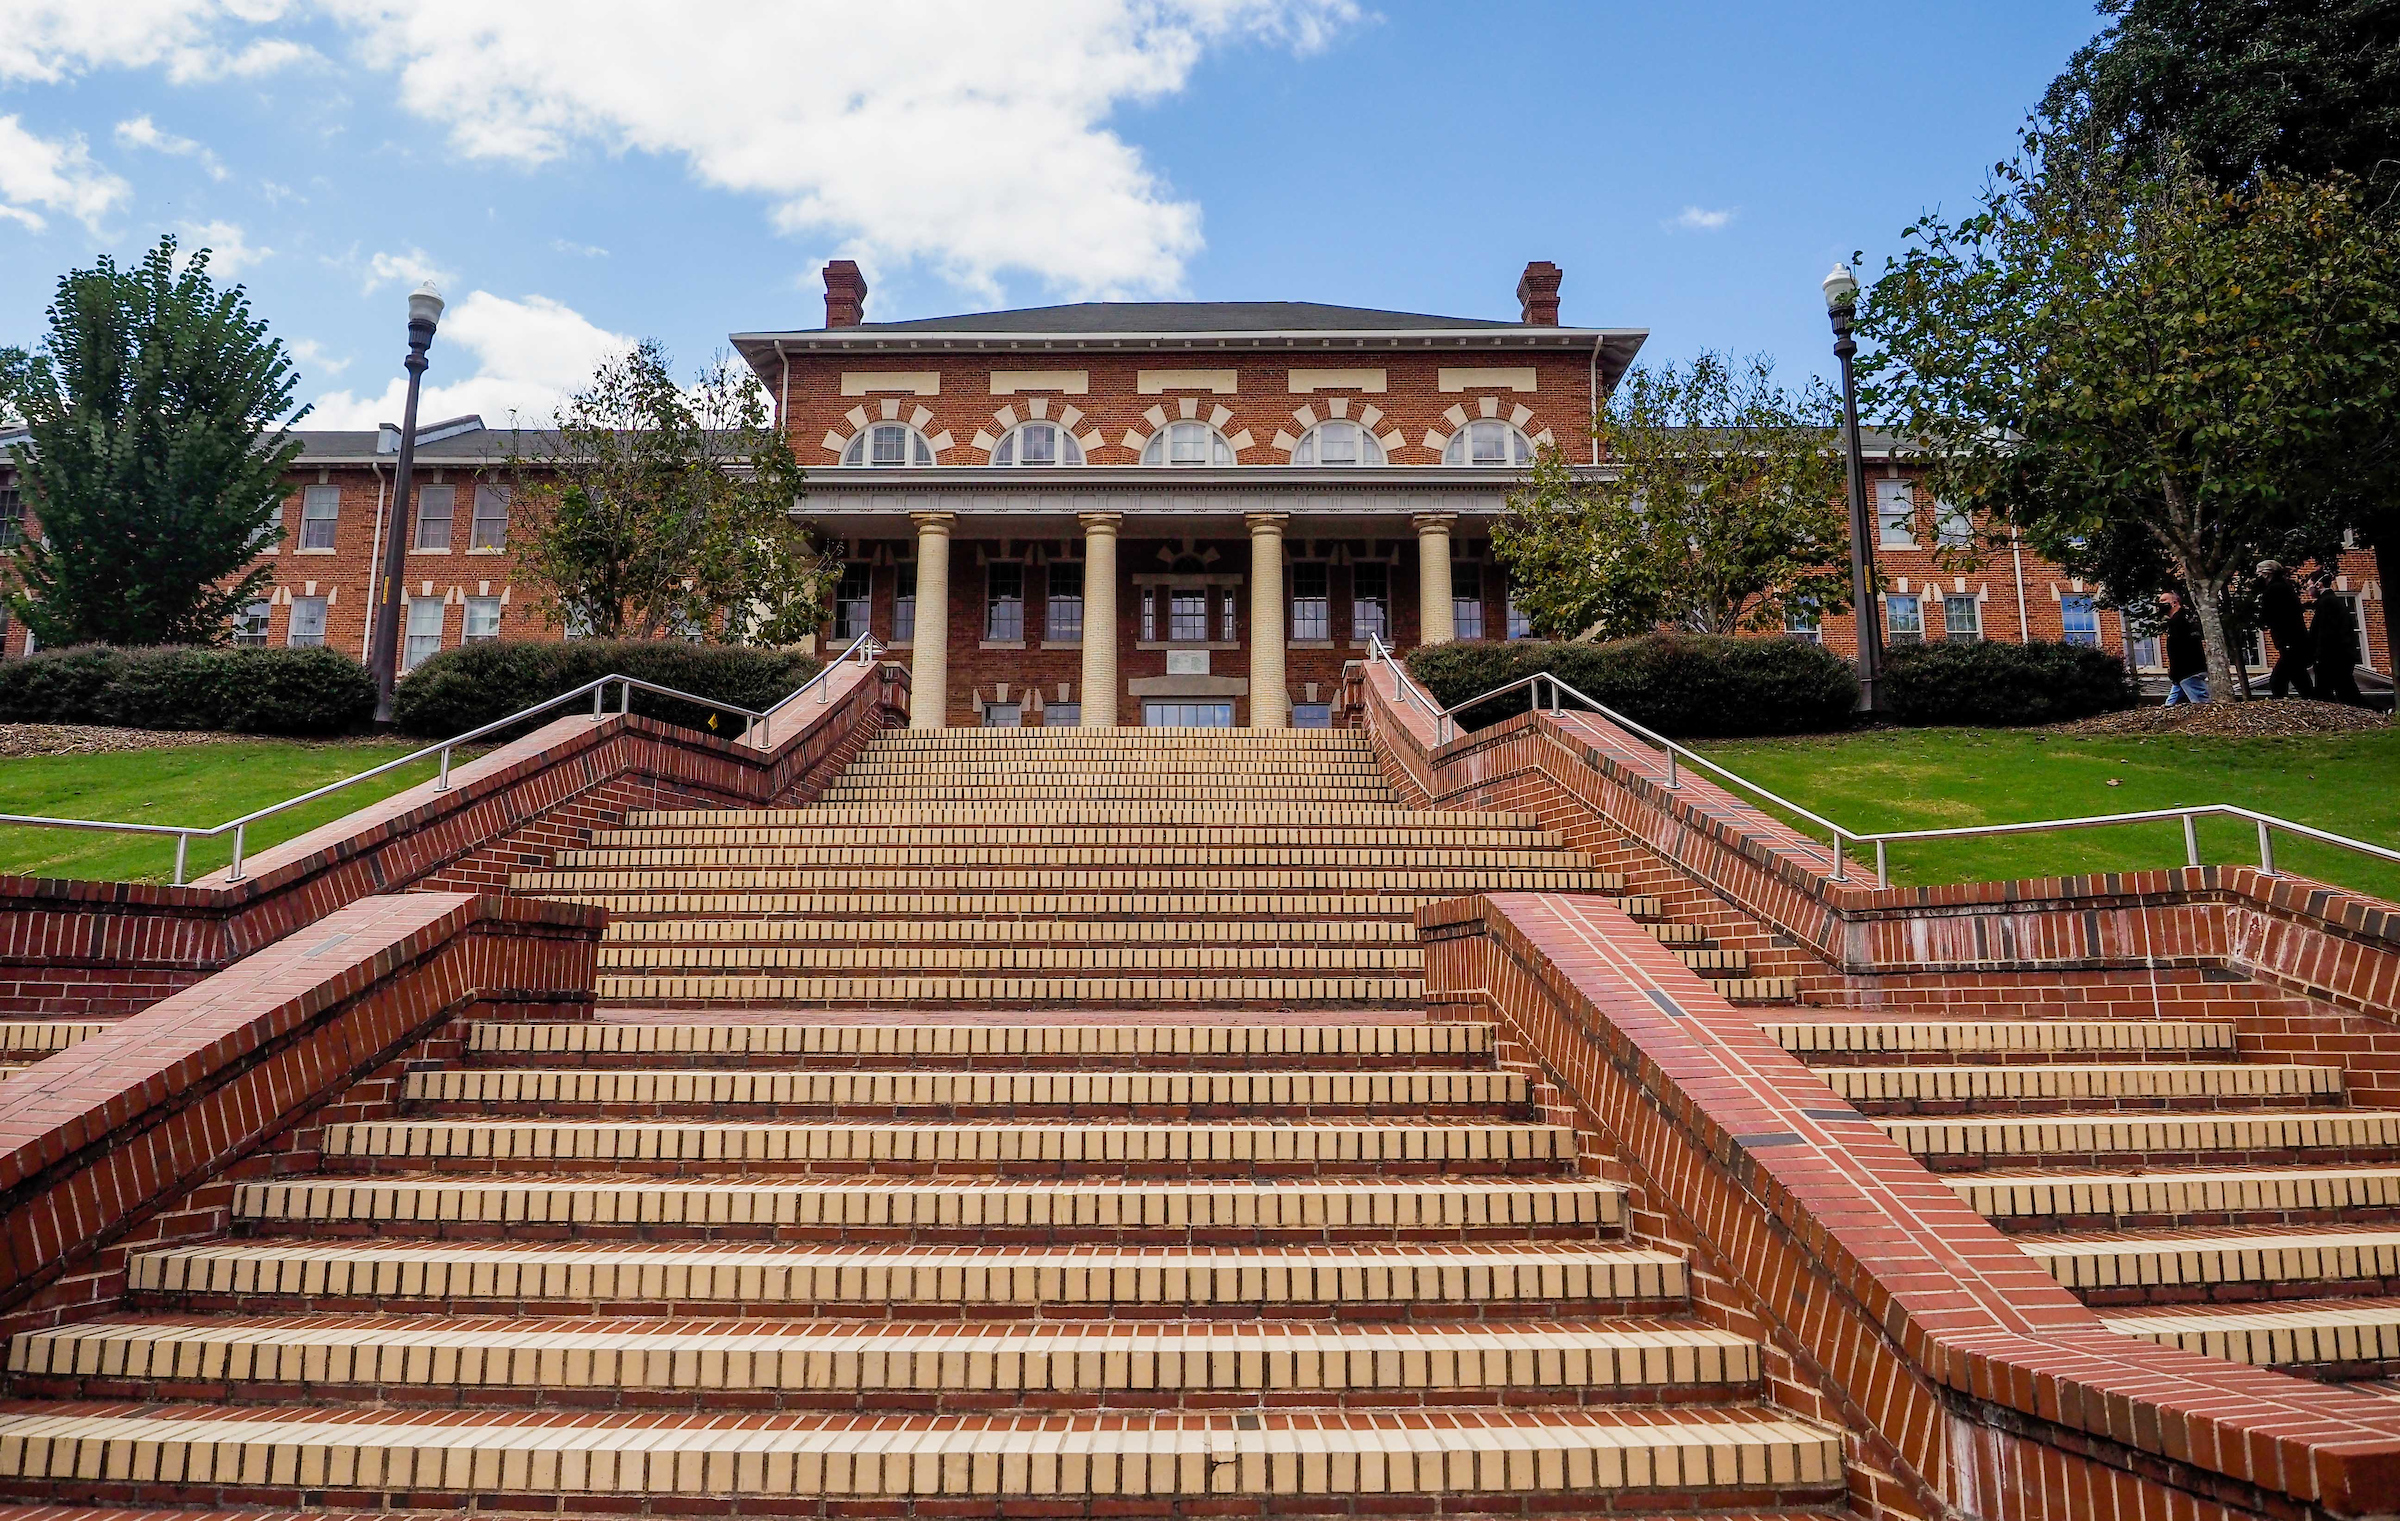 The 1911 building steps stand empty after undergraduate classes moved online for the remainder of the fall 2020 semester. 